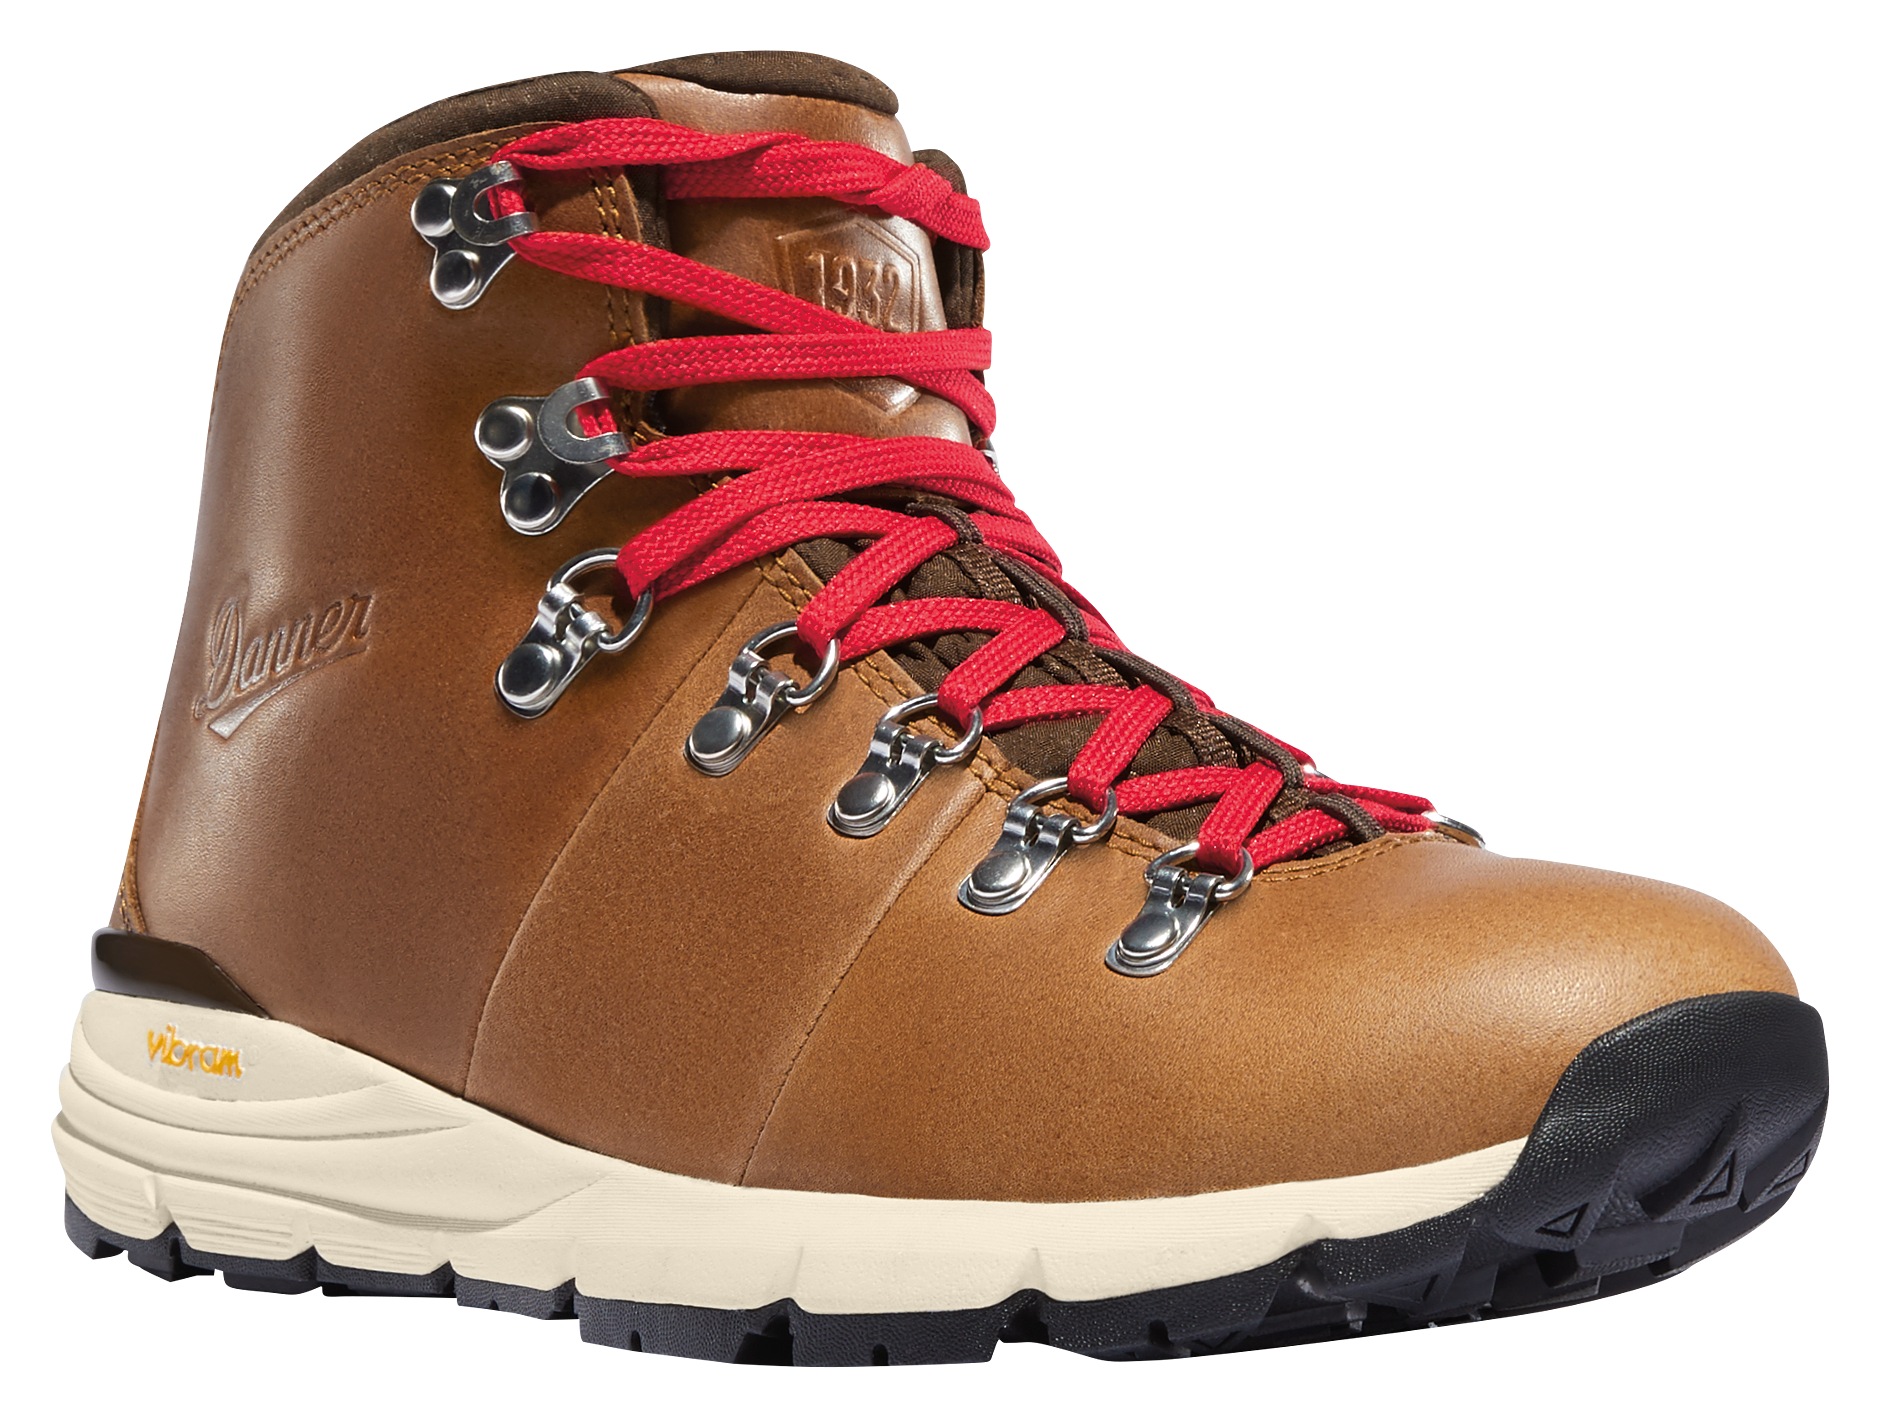 Danner Mountain 600 Leather Waterproof Hiking Boots for Ladies - Saddle Tan - 8M